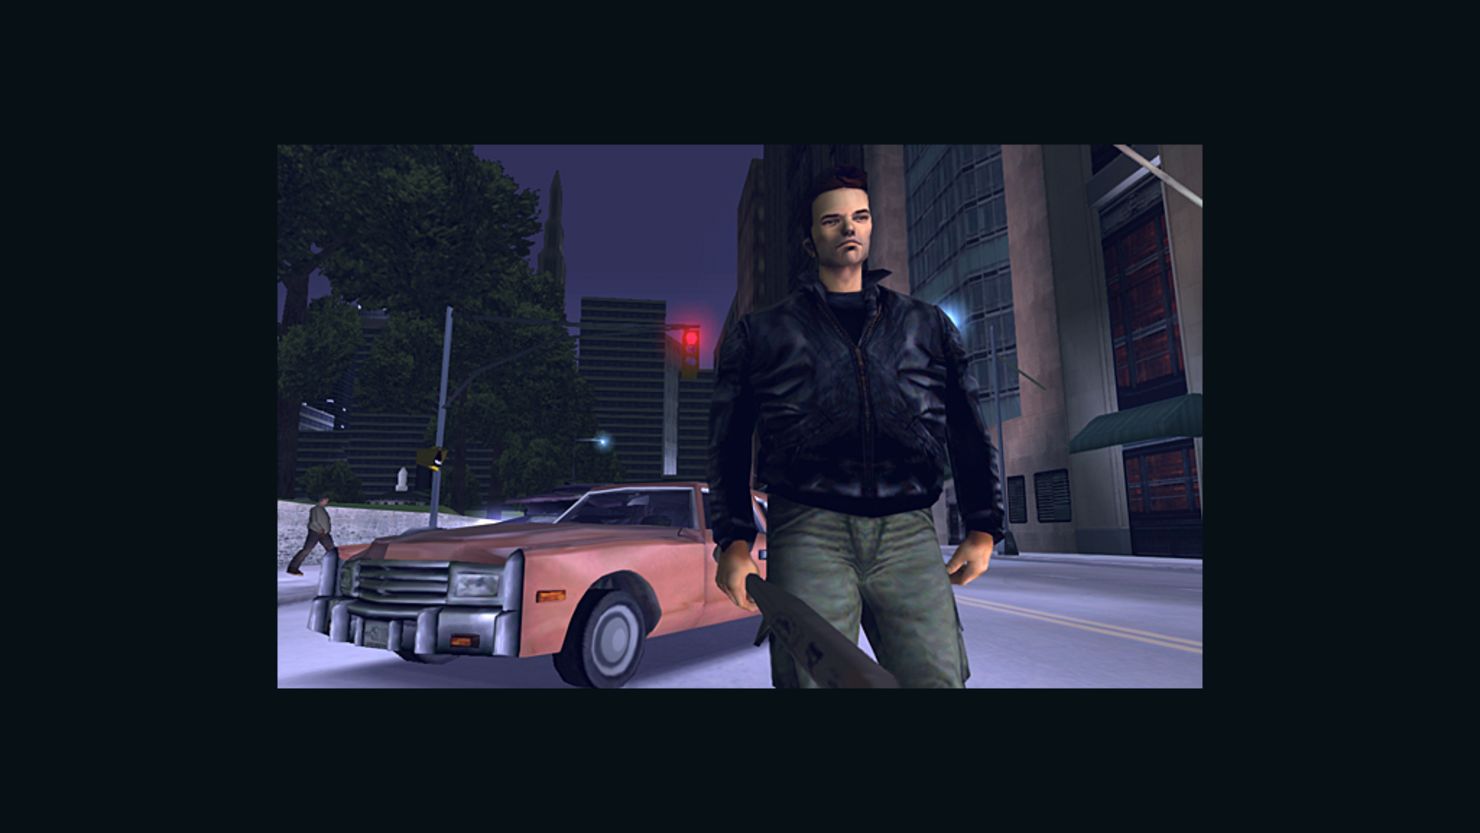 The new "Grand Theft Auto III" for Android looks similar to the iPhone version.